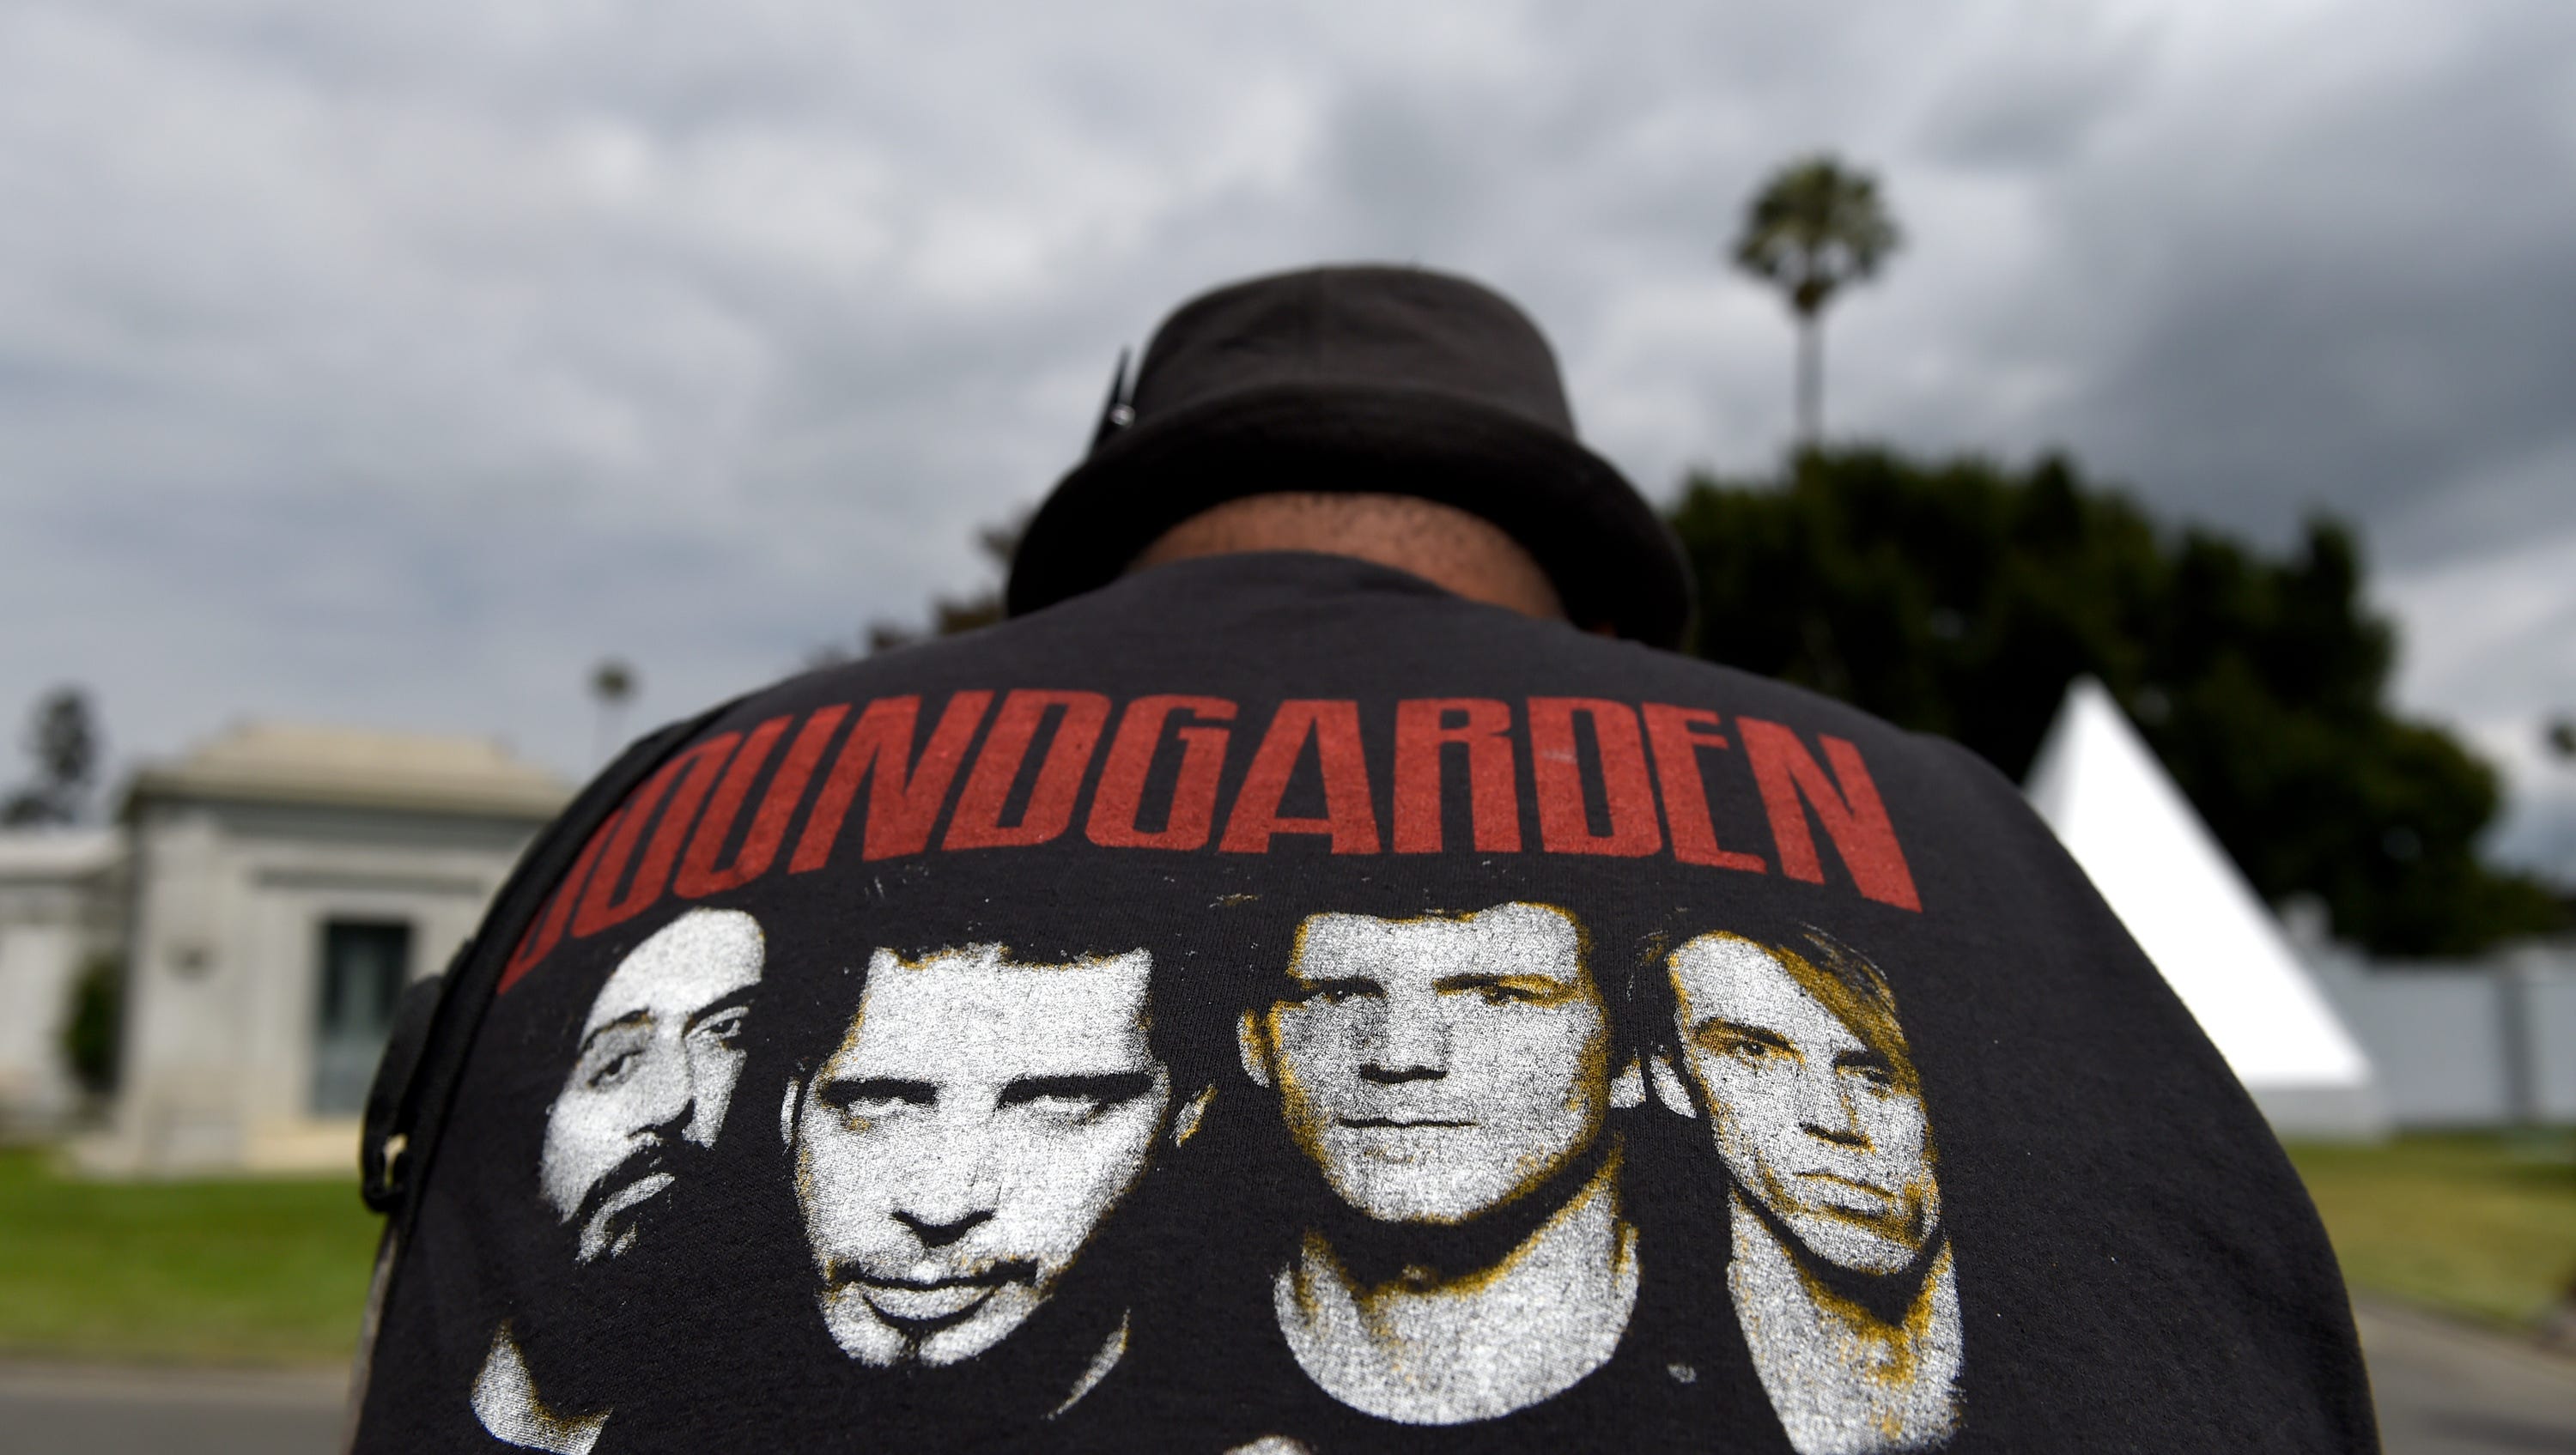 A fan wearing a Soundgarden T-shirt reacts following a funeral for Chris Cornell at the Hollywood Forever Cemetery in Los Angeles.